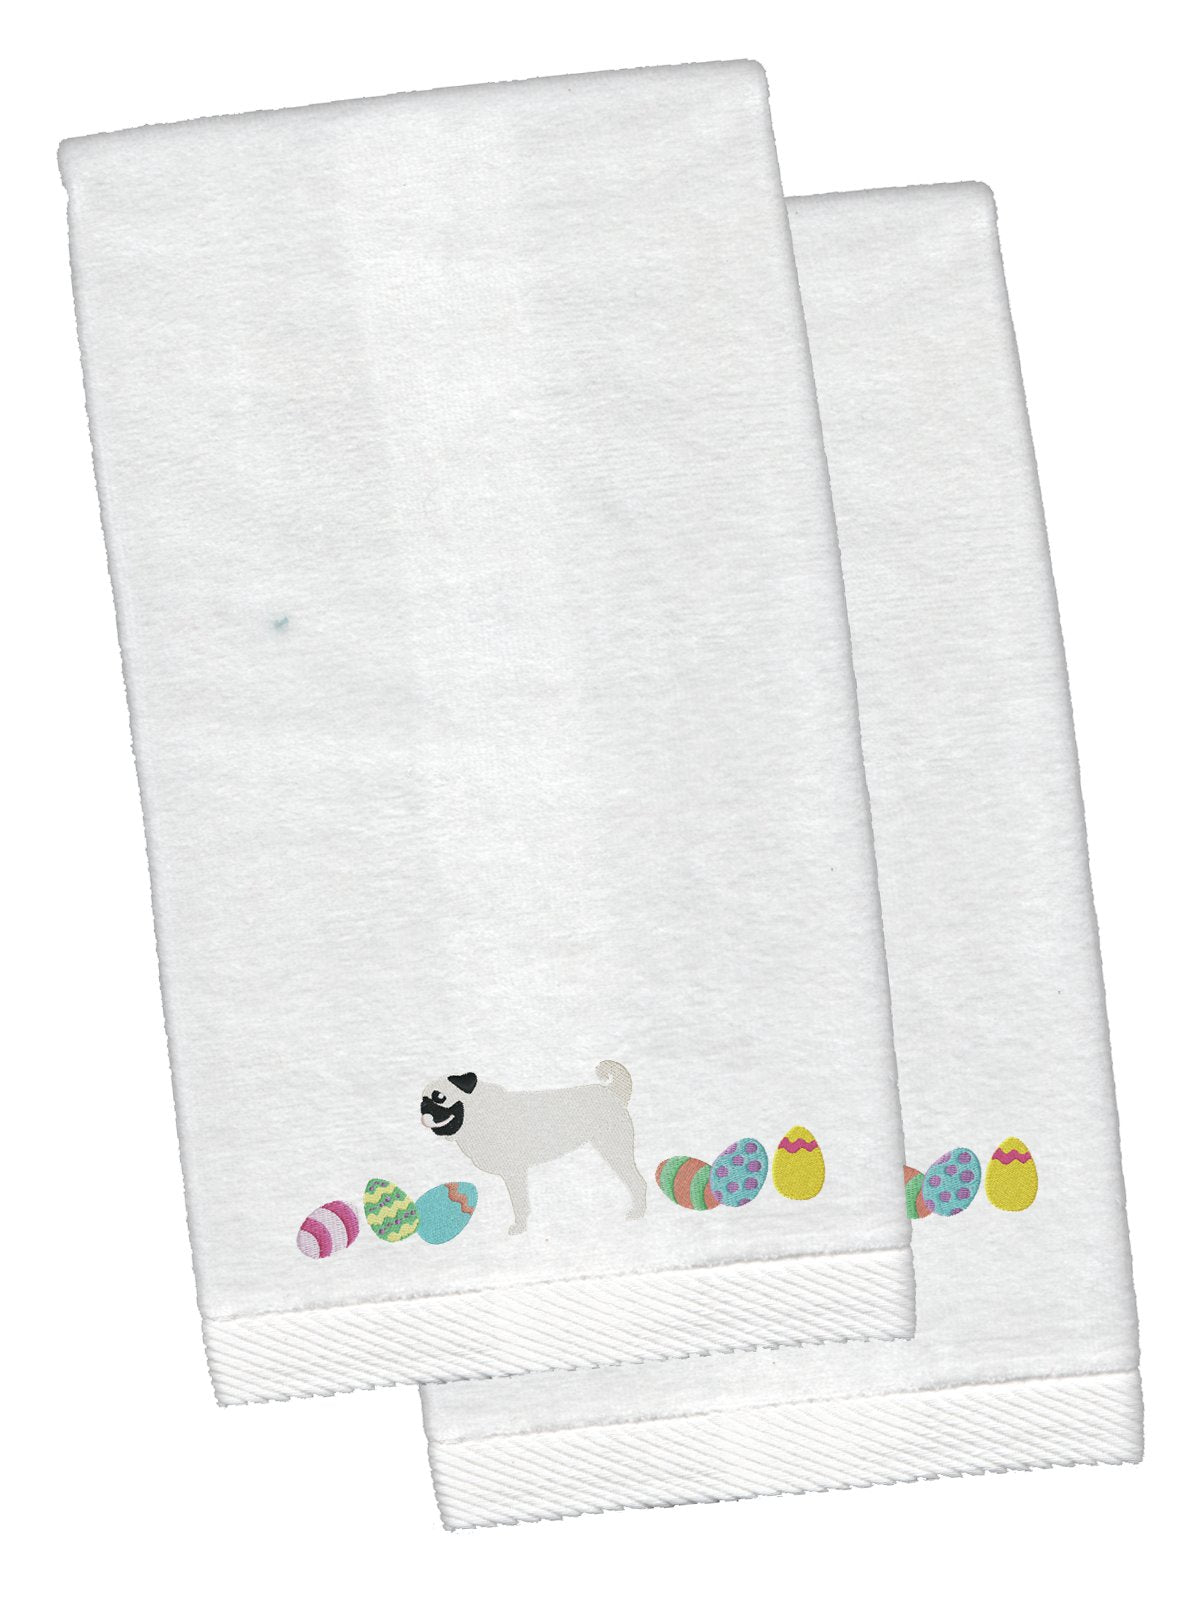 Pug Easter White Embroidered Plush Hand Towel Set of 2 CK1675KTEMB by Caroline's Treasures